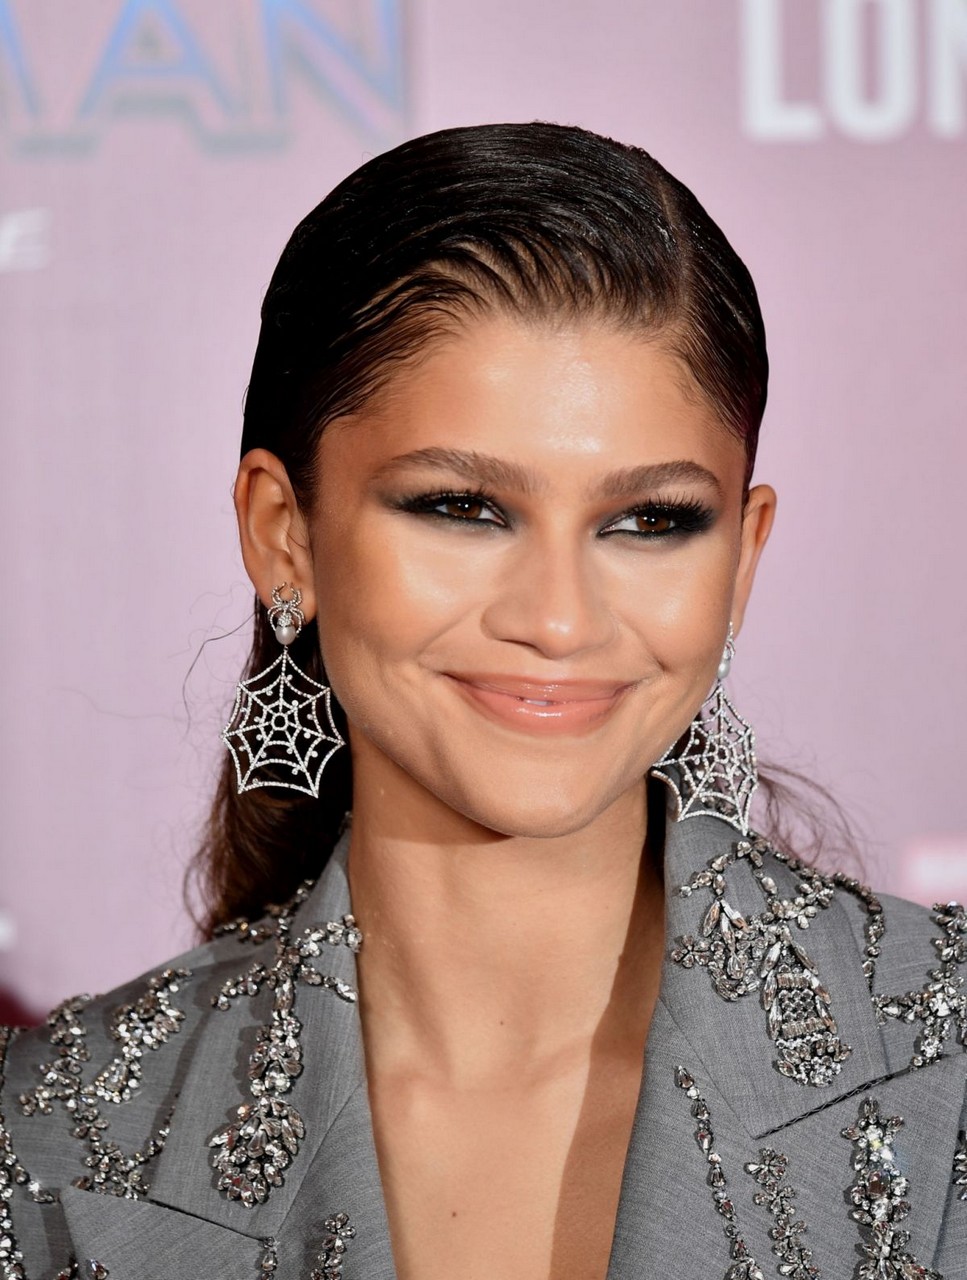 Zendaya Spiderman No Way Home Photocall Old Sessions House London